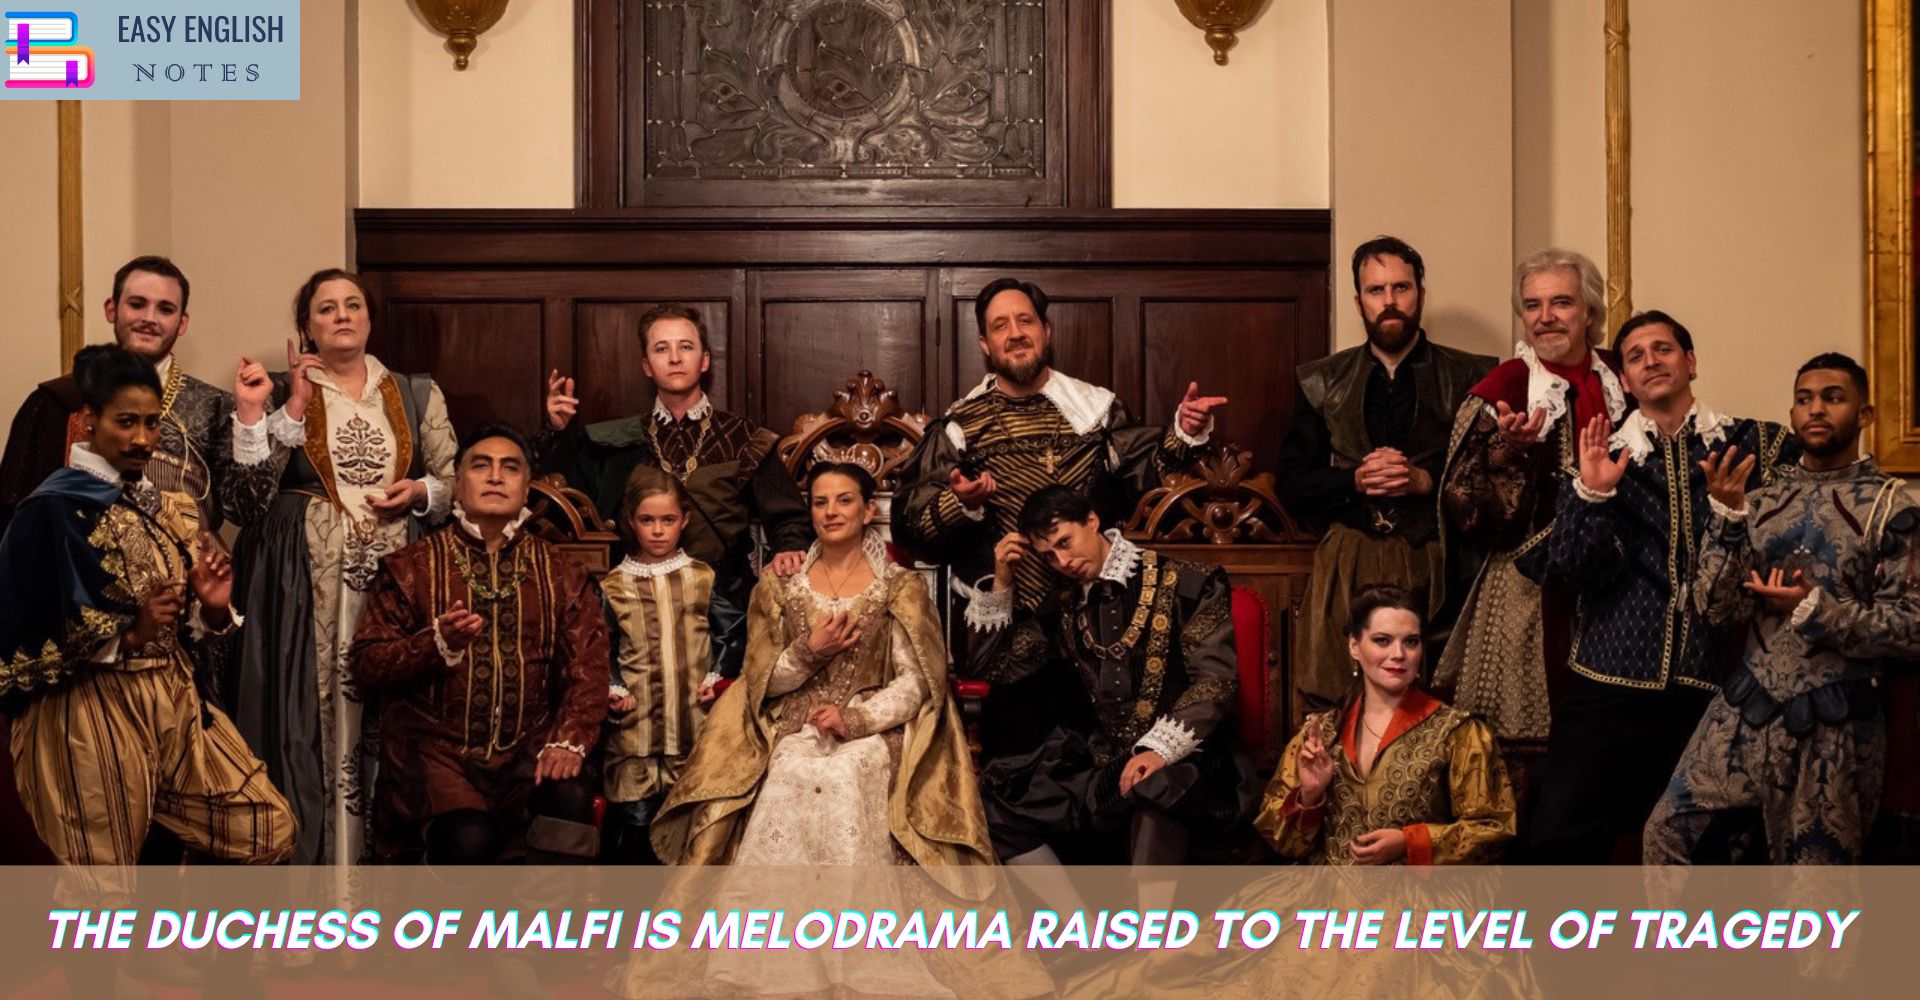 The Duchess of Malfi is melodrama raised to the level of tragedy